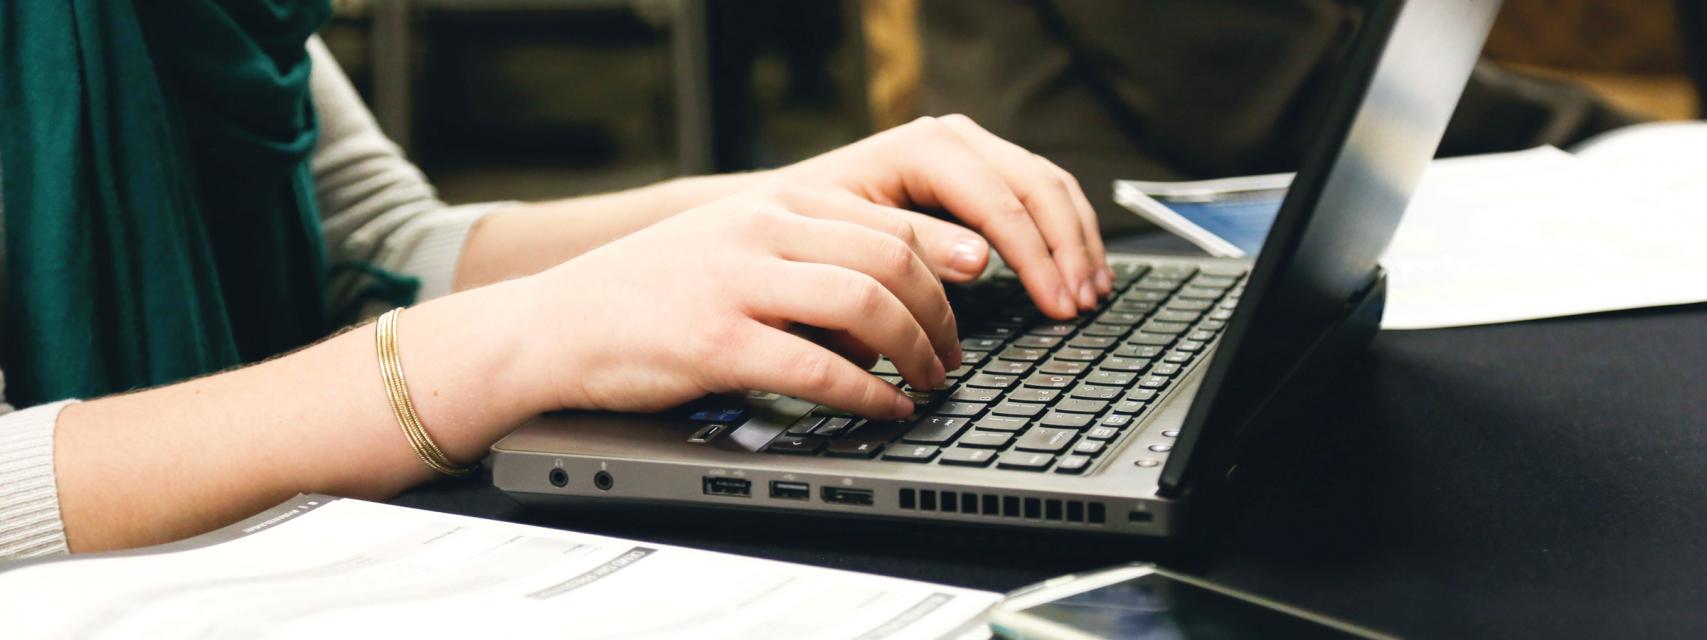 close up shot of someone typing on a laptop